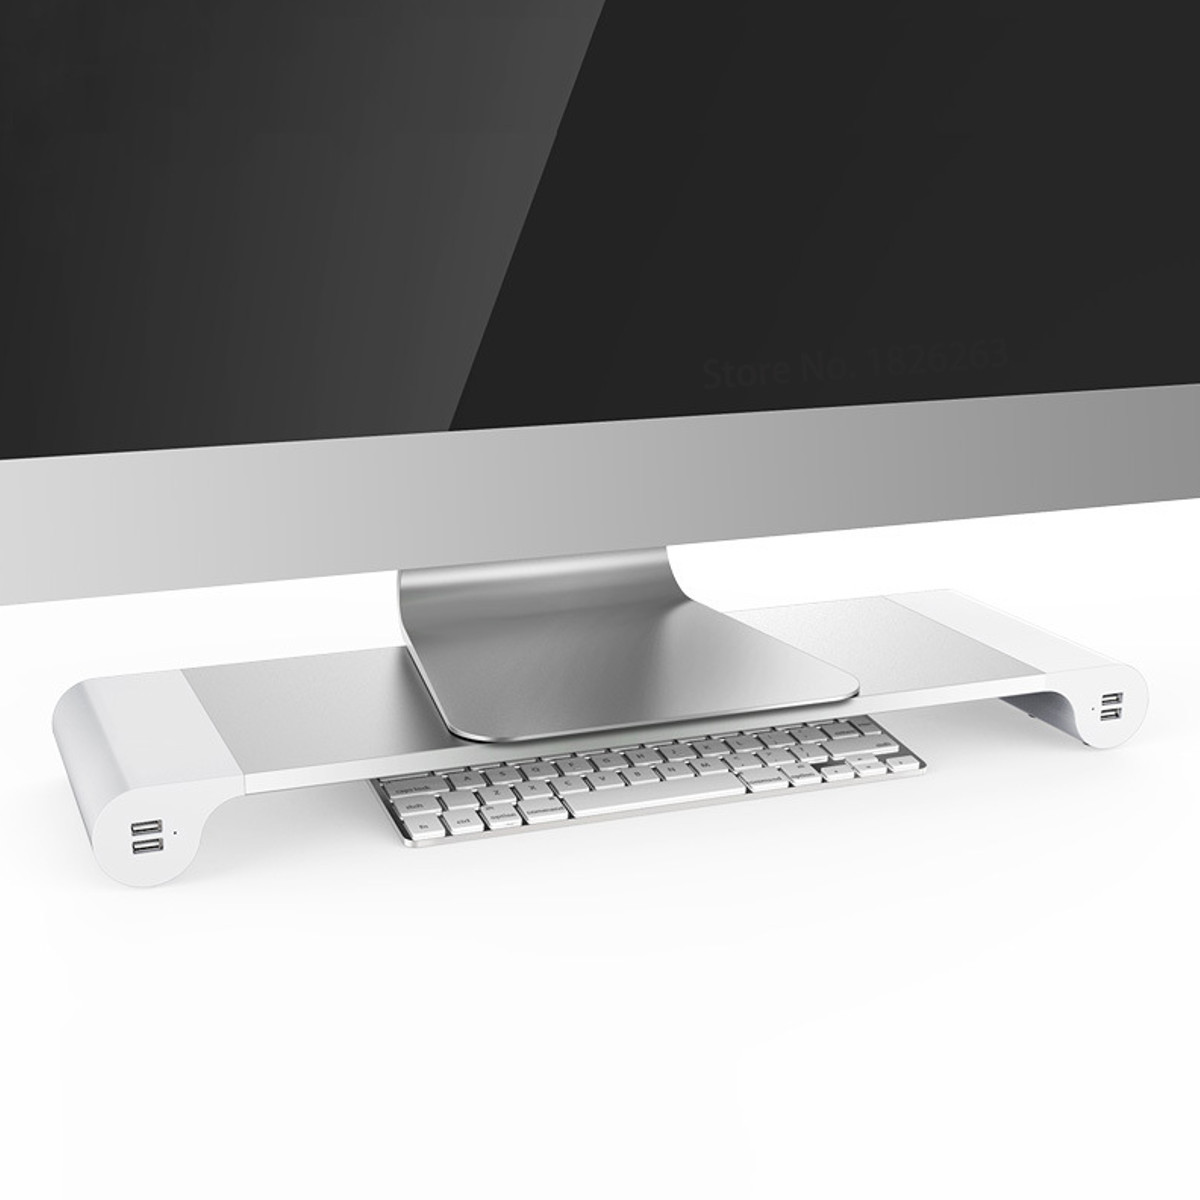 Aluminum-Desktop-Monitor-Stand-Non-slip-Notebook-Laptop-Riser-with-4-ports-USB-charger-for-iMac-MacB-1639044-6